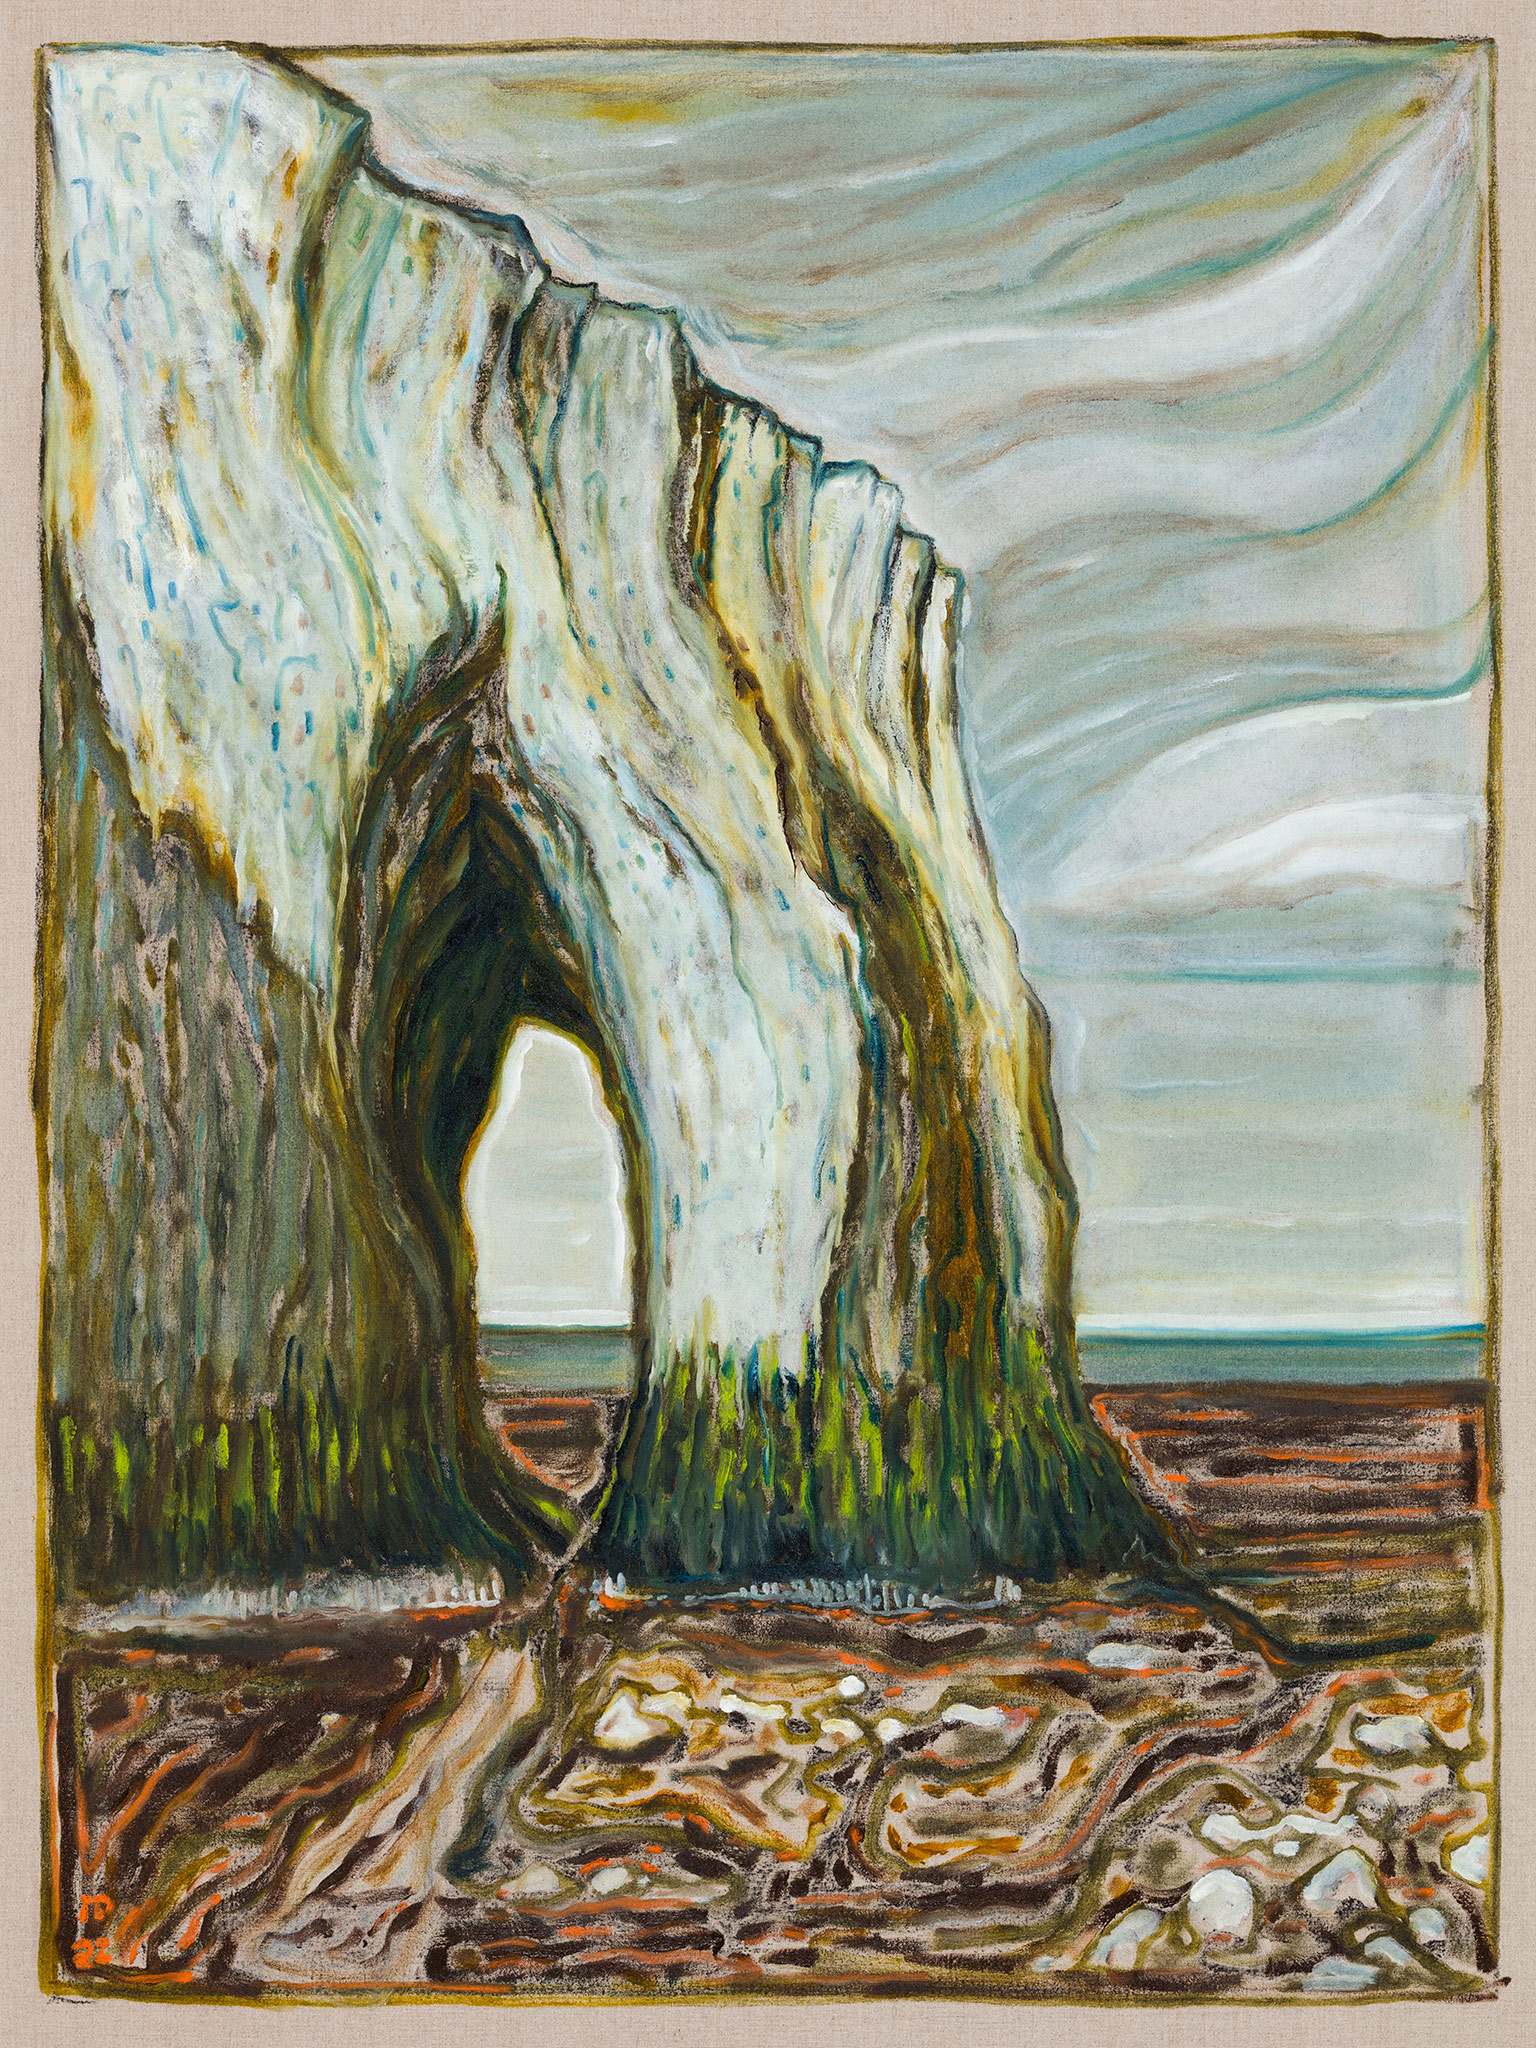 The Wick - Billy Childish, cliff (2022), Oil and charcoal on linen, 122 x 92 cm